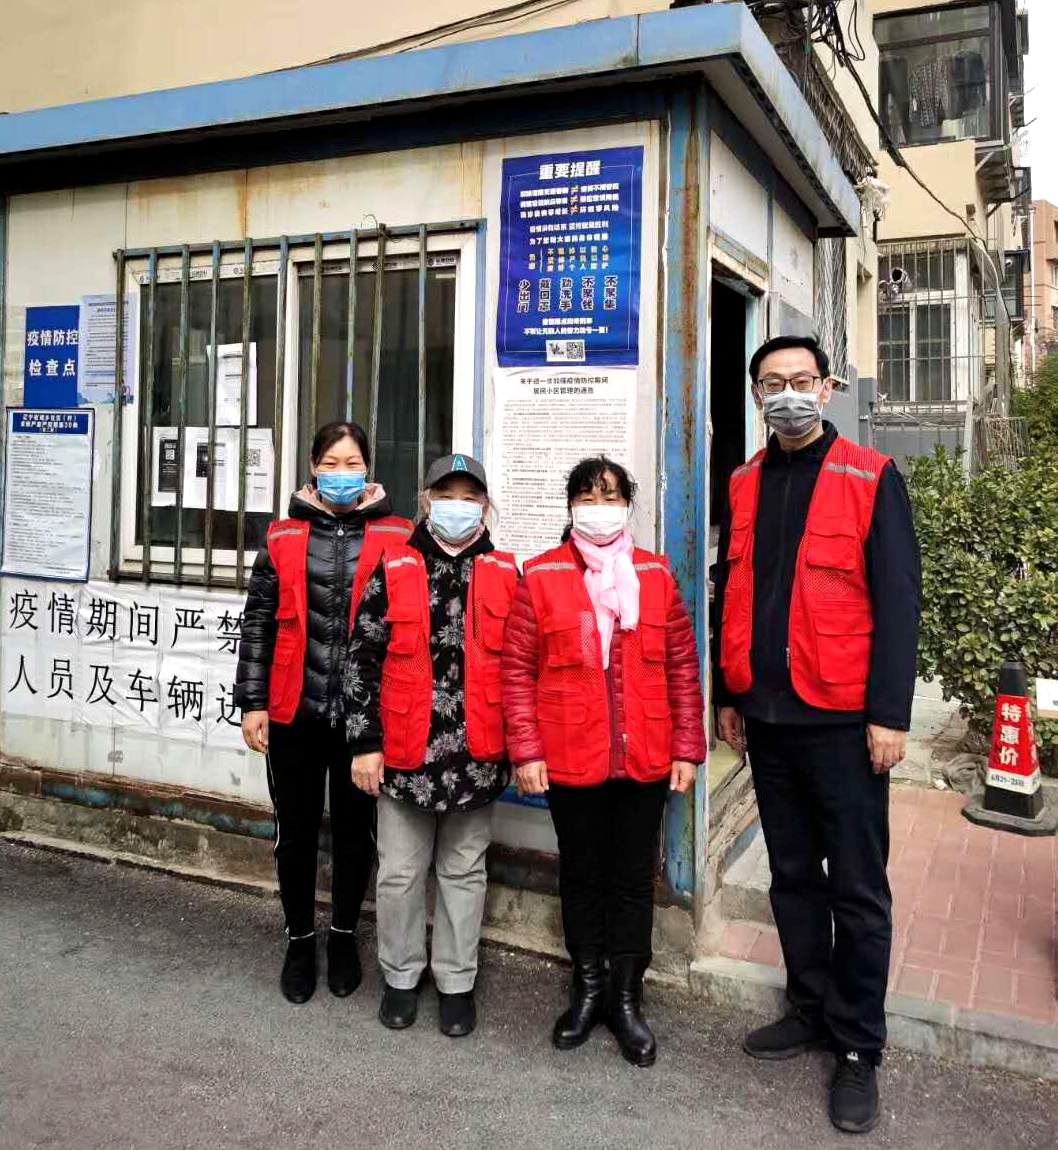 Believers of Gospel Church in Zhongshan District, Dalian, Liaoning served in a community on March 20, 2020. 